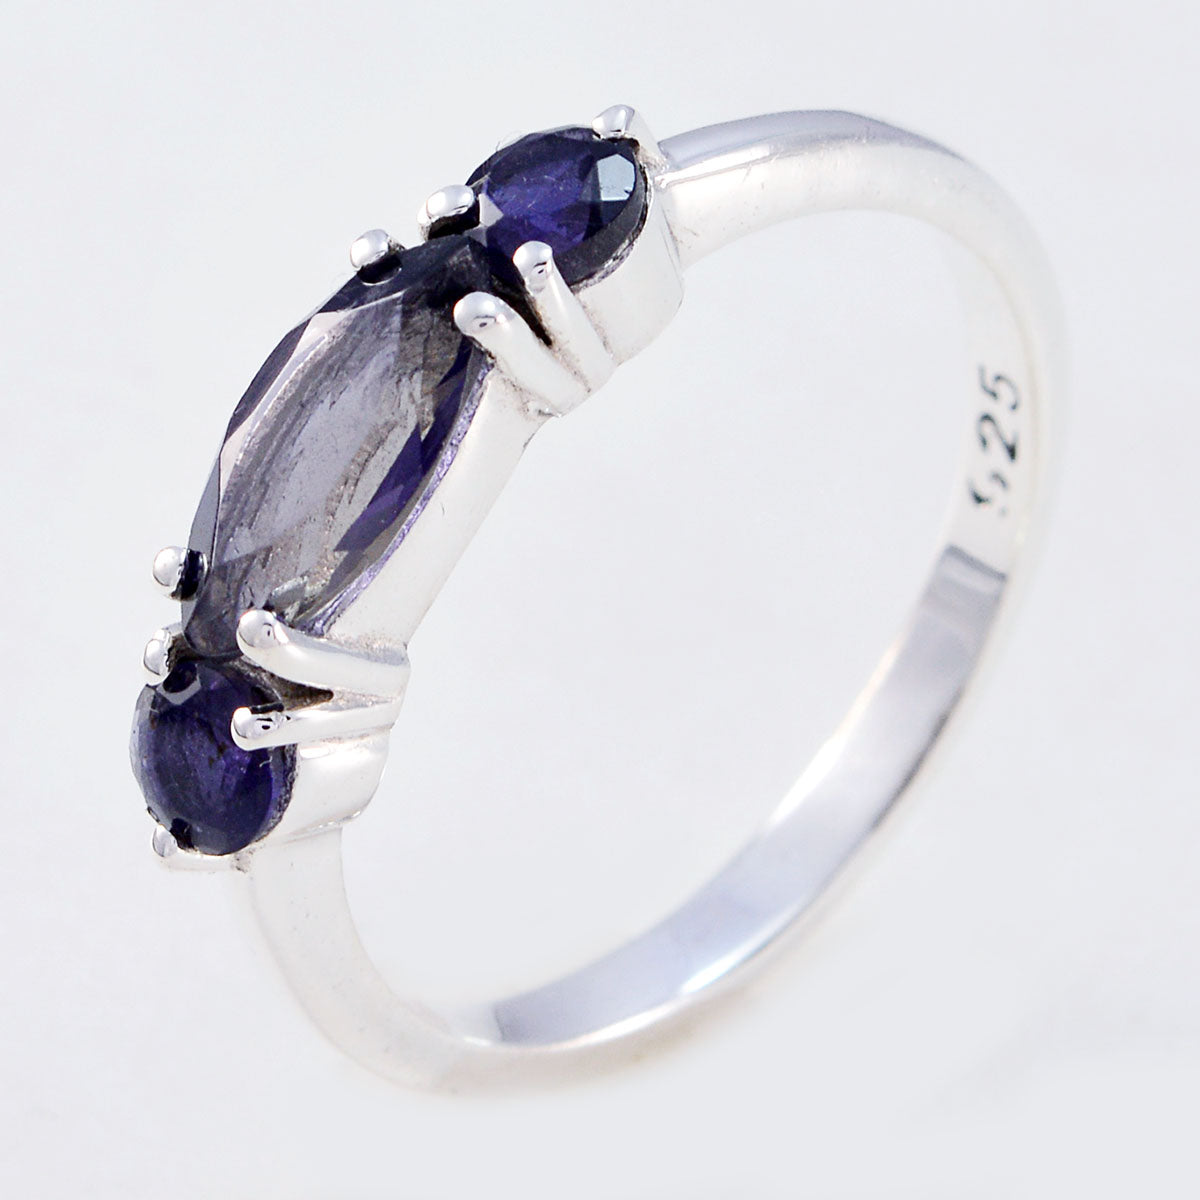 Luscious Gemstone Iolite Solid Silver Rings Mother Daughter Jewelry